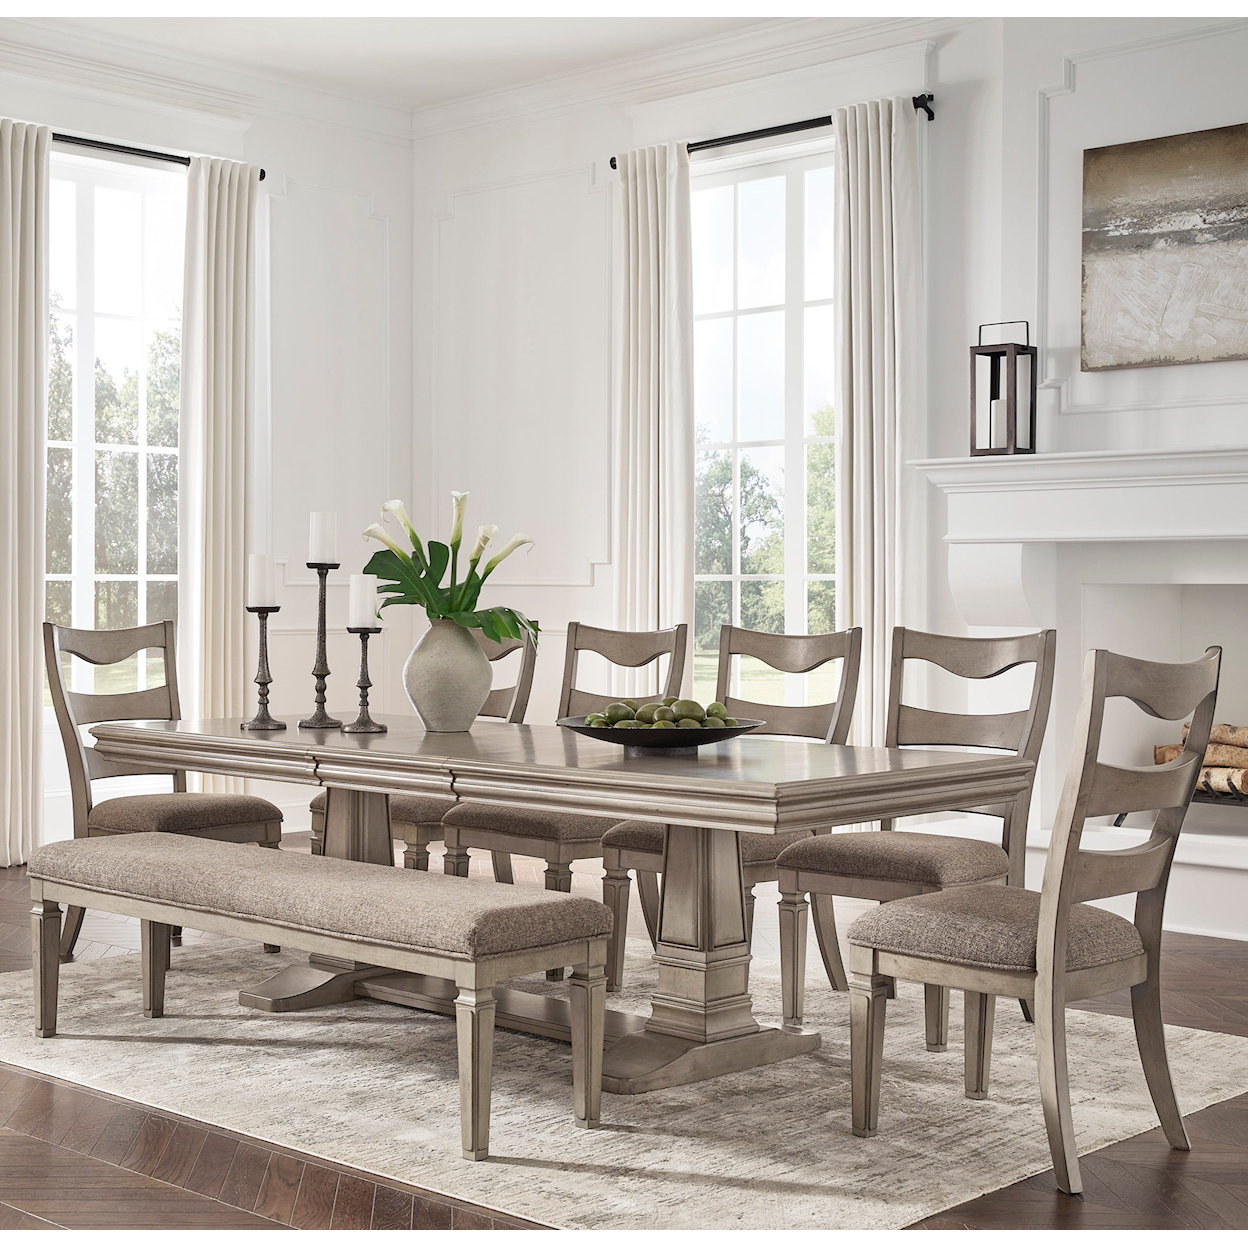 Signature Design by Ashley Lexorne 8-Piece Dining Set with Bench